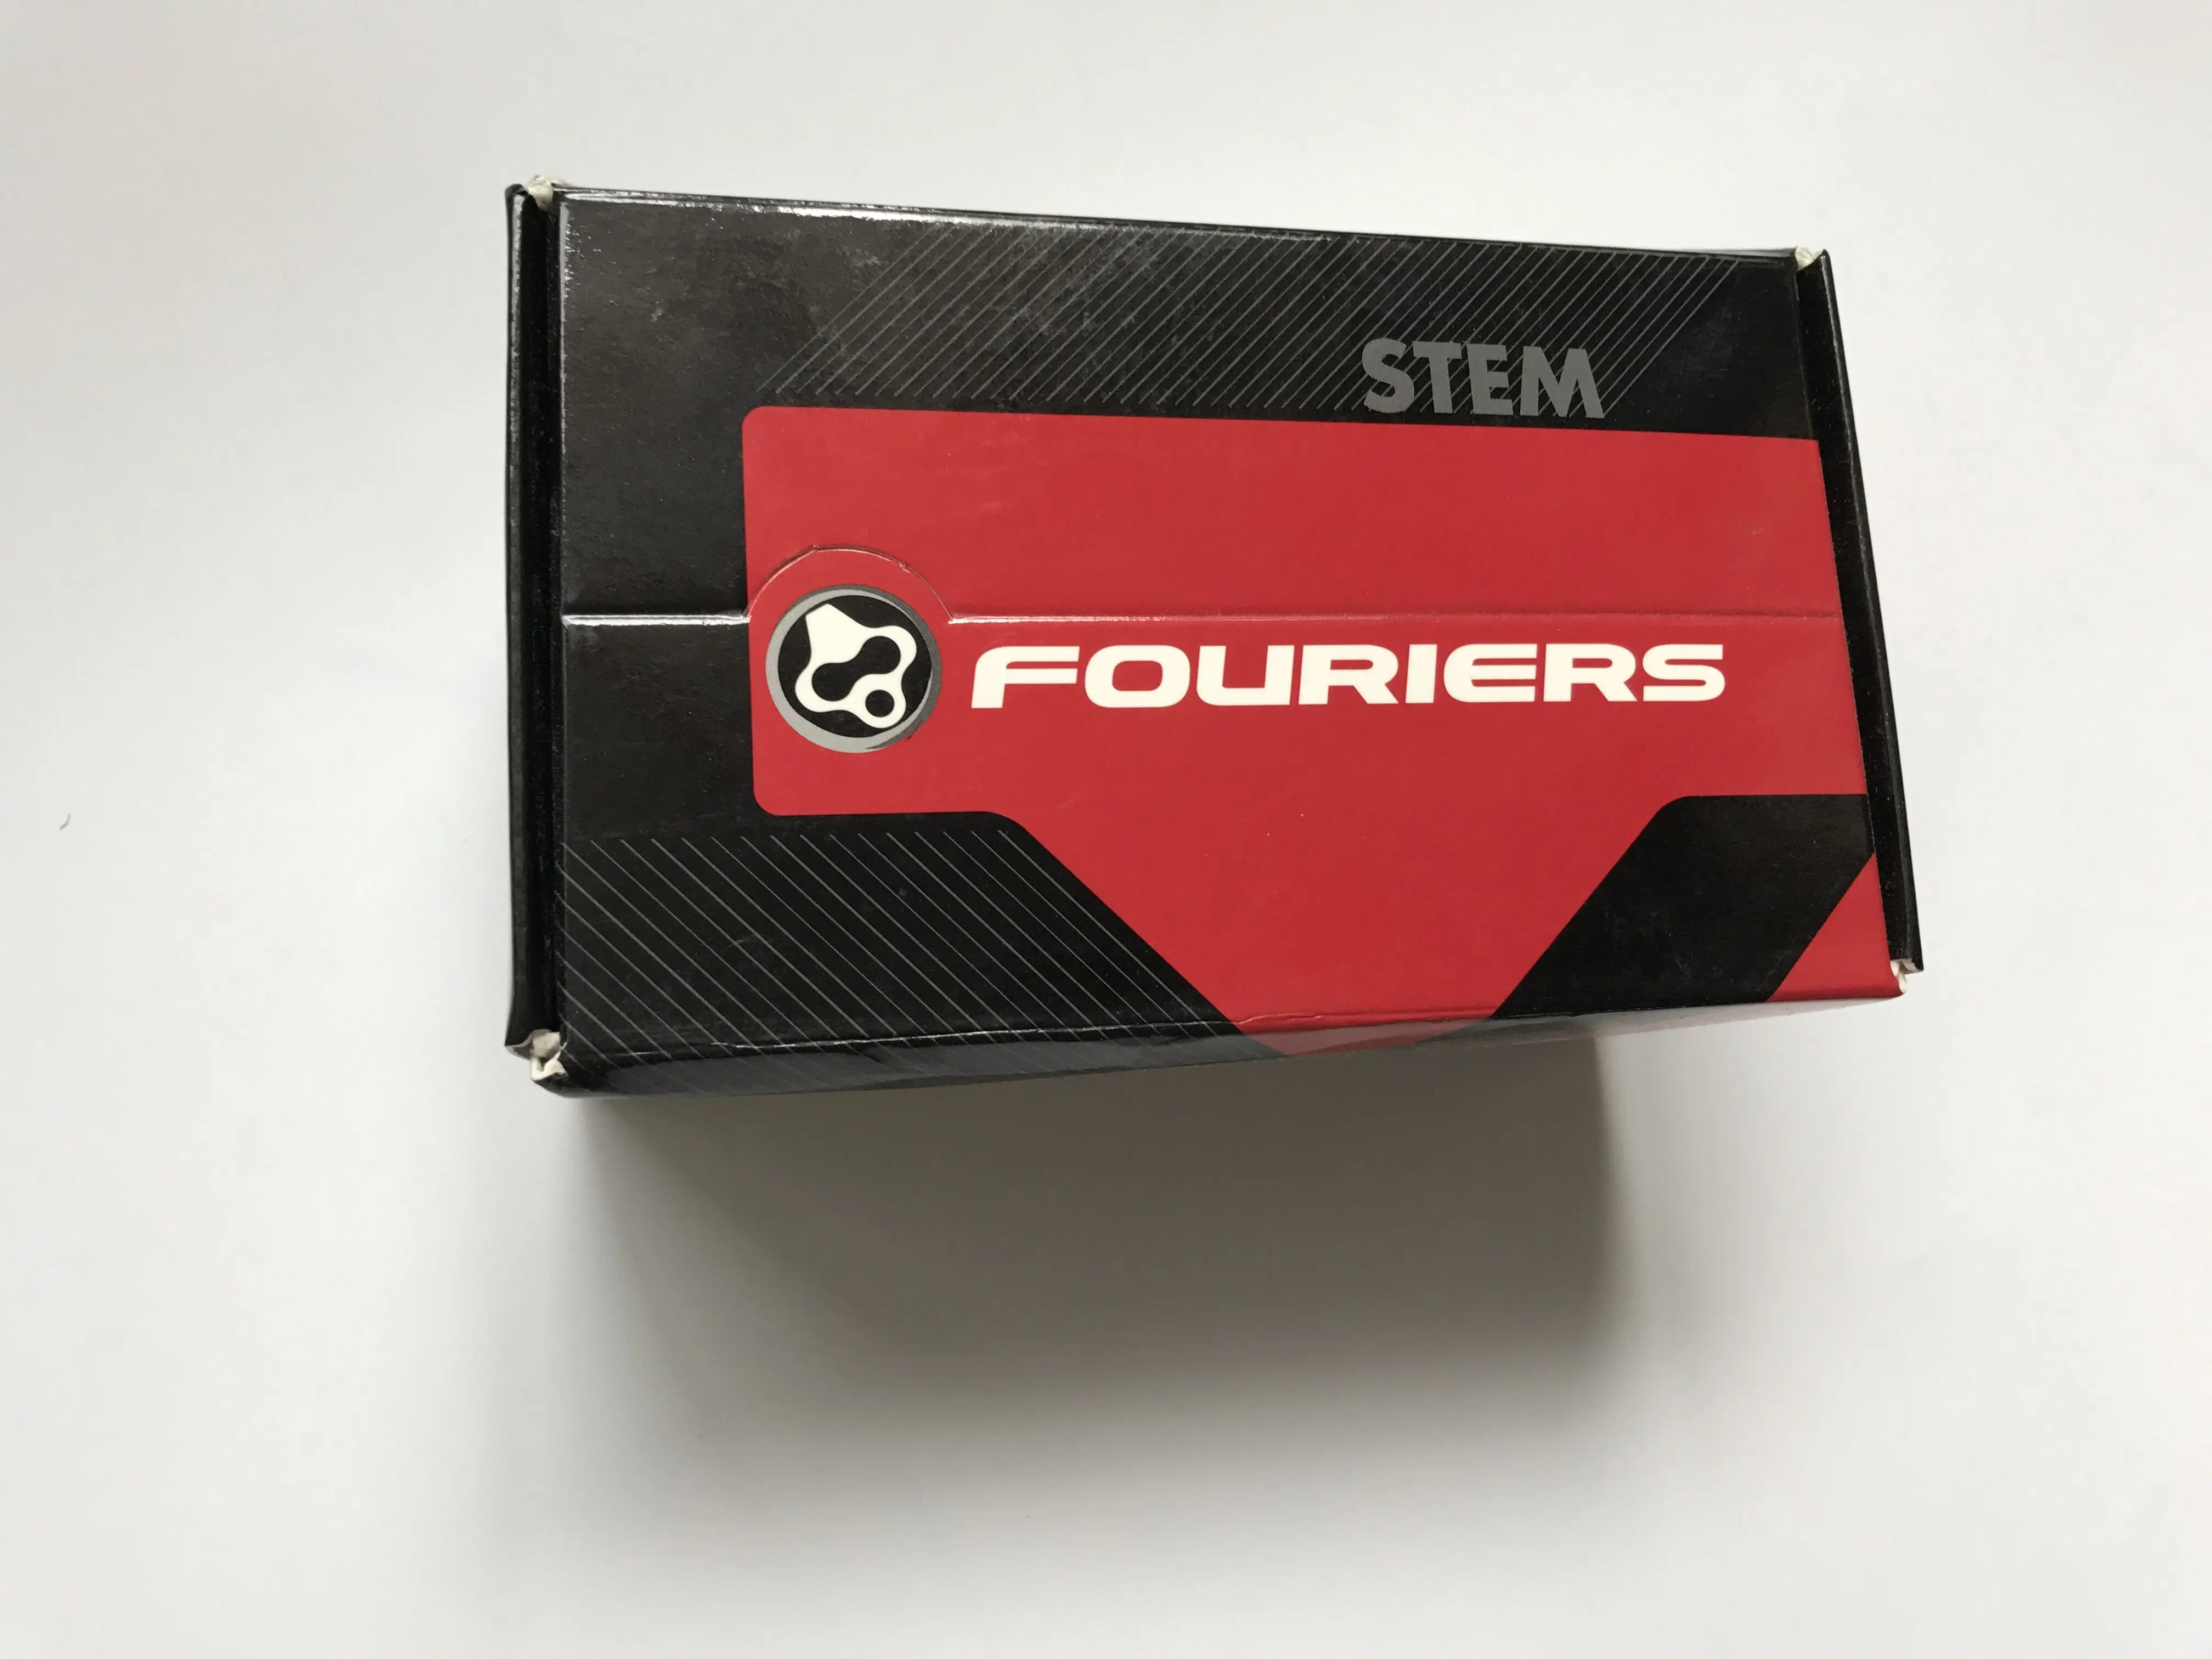 

FOURIERS AL 6066-T6 aluminum alloy SM-RA003-701 6 degrees Cycling Bicycle Stem Parts Length: 70mm